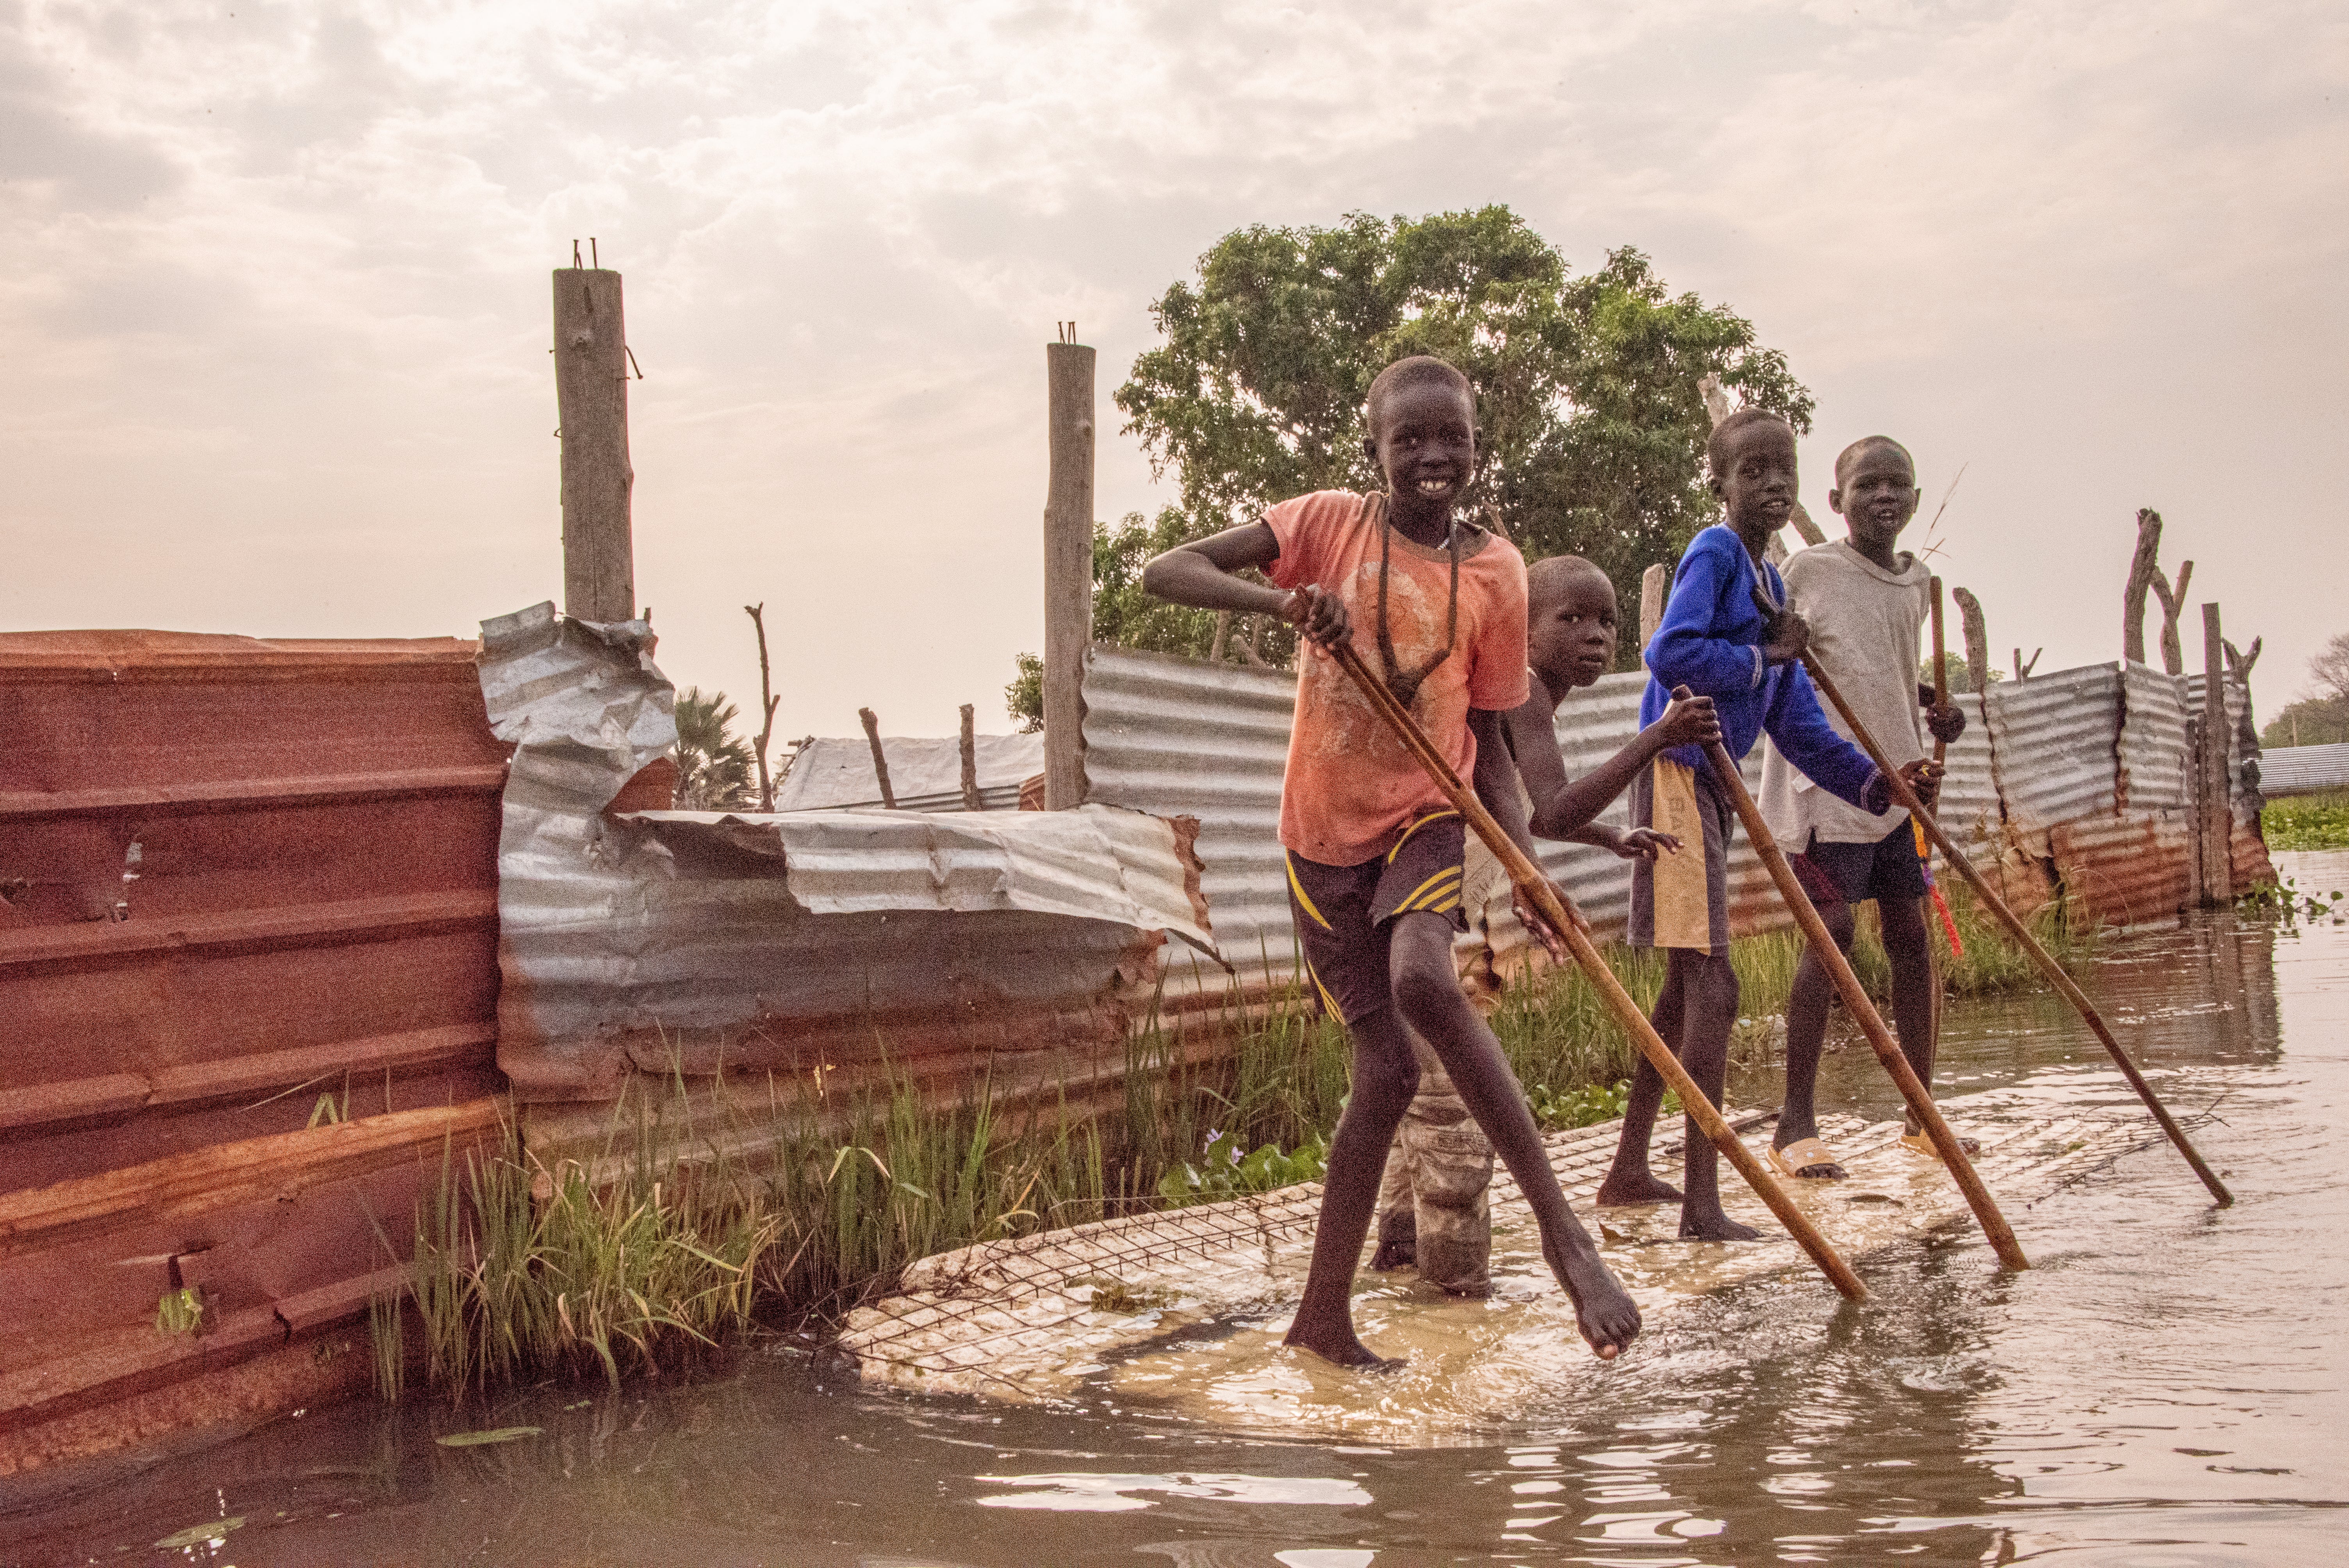 Children in Bor, where regular flooding means locals sometimes resort to canoes to get around